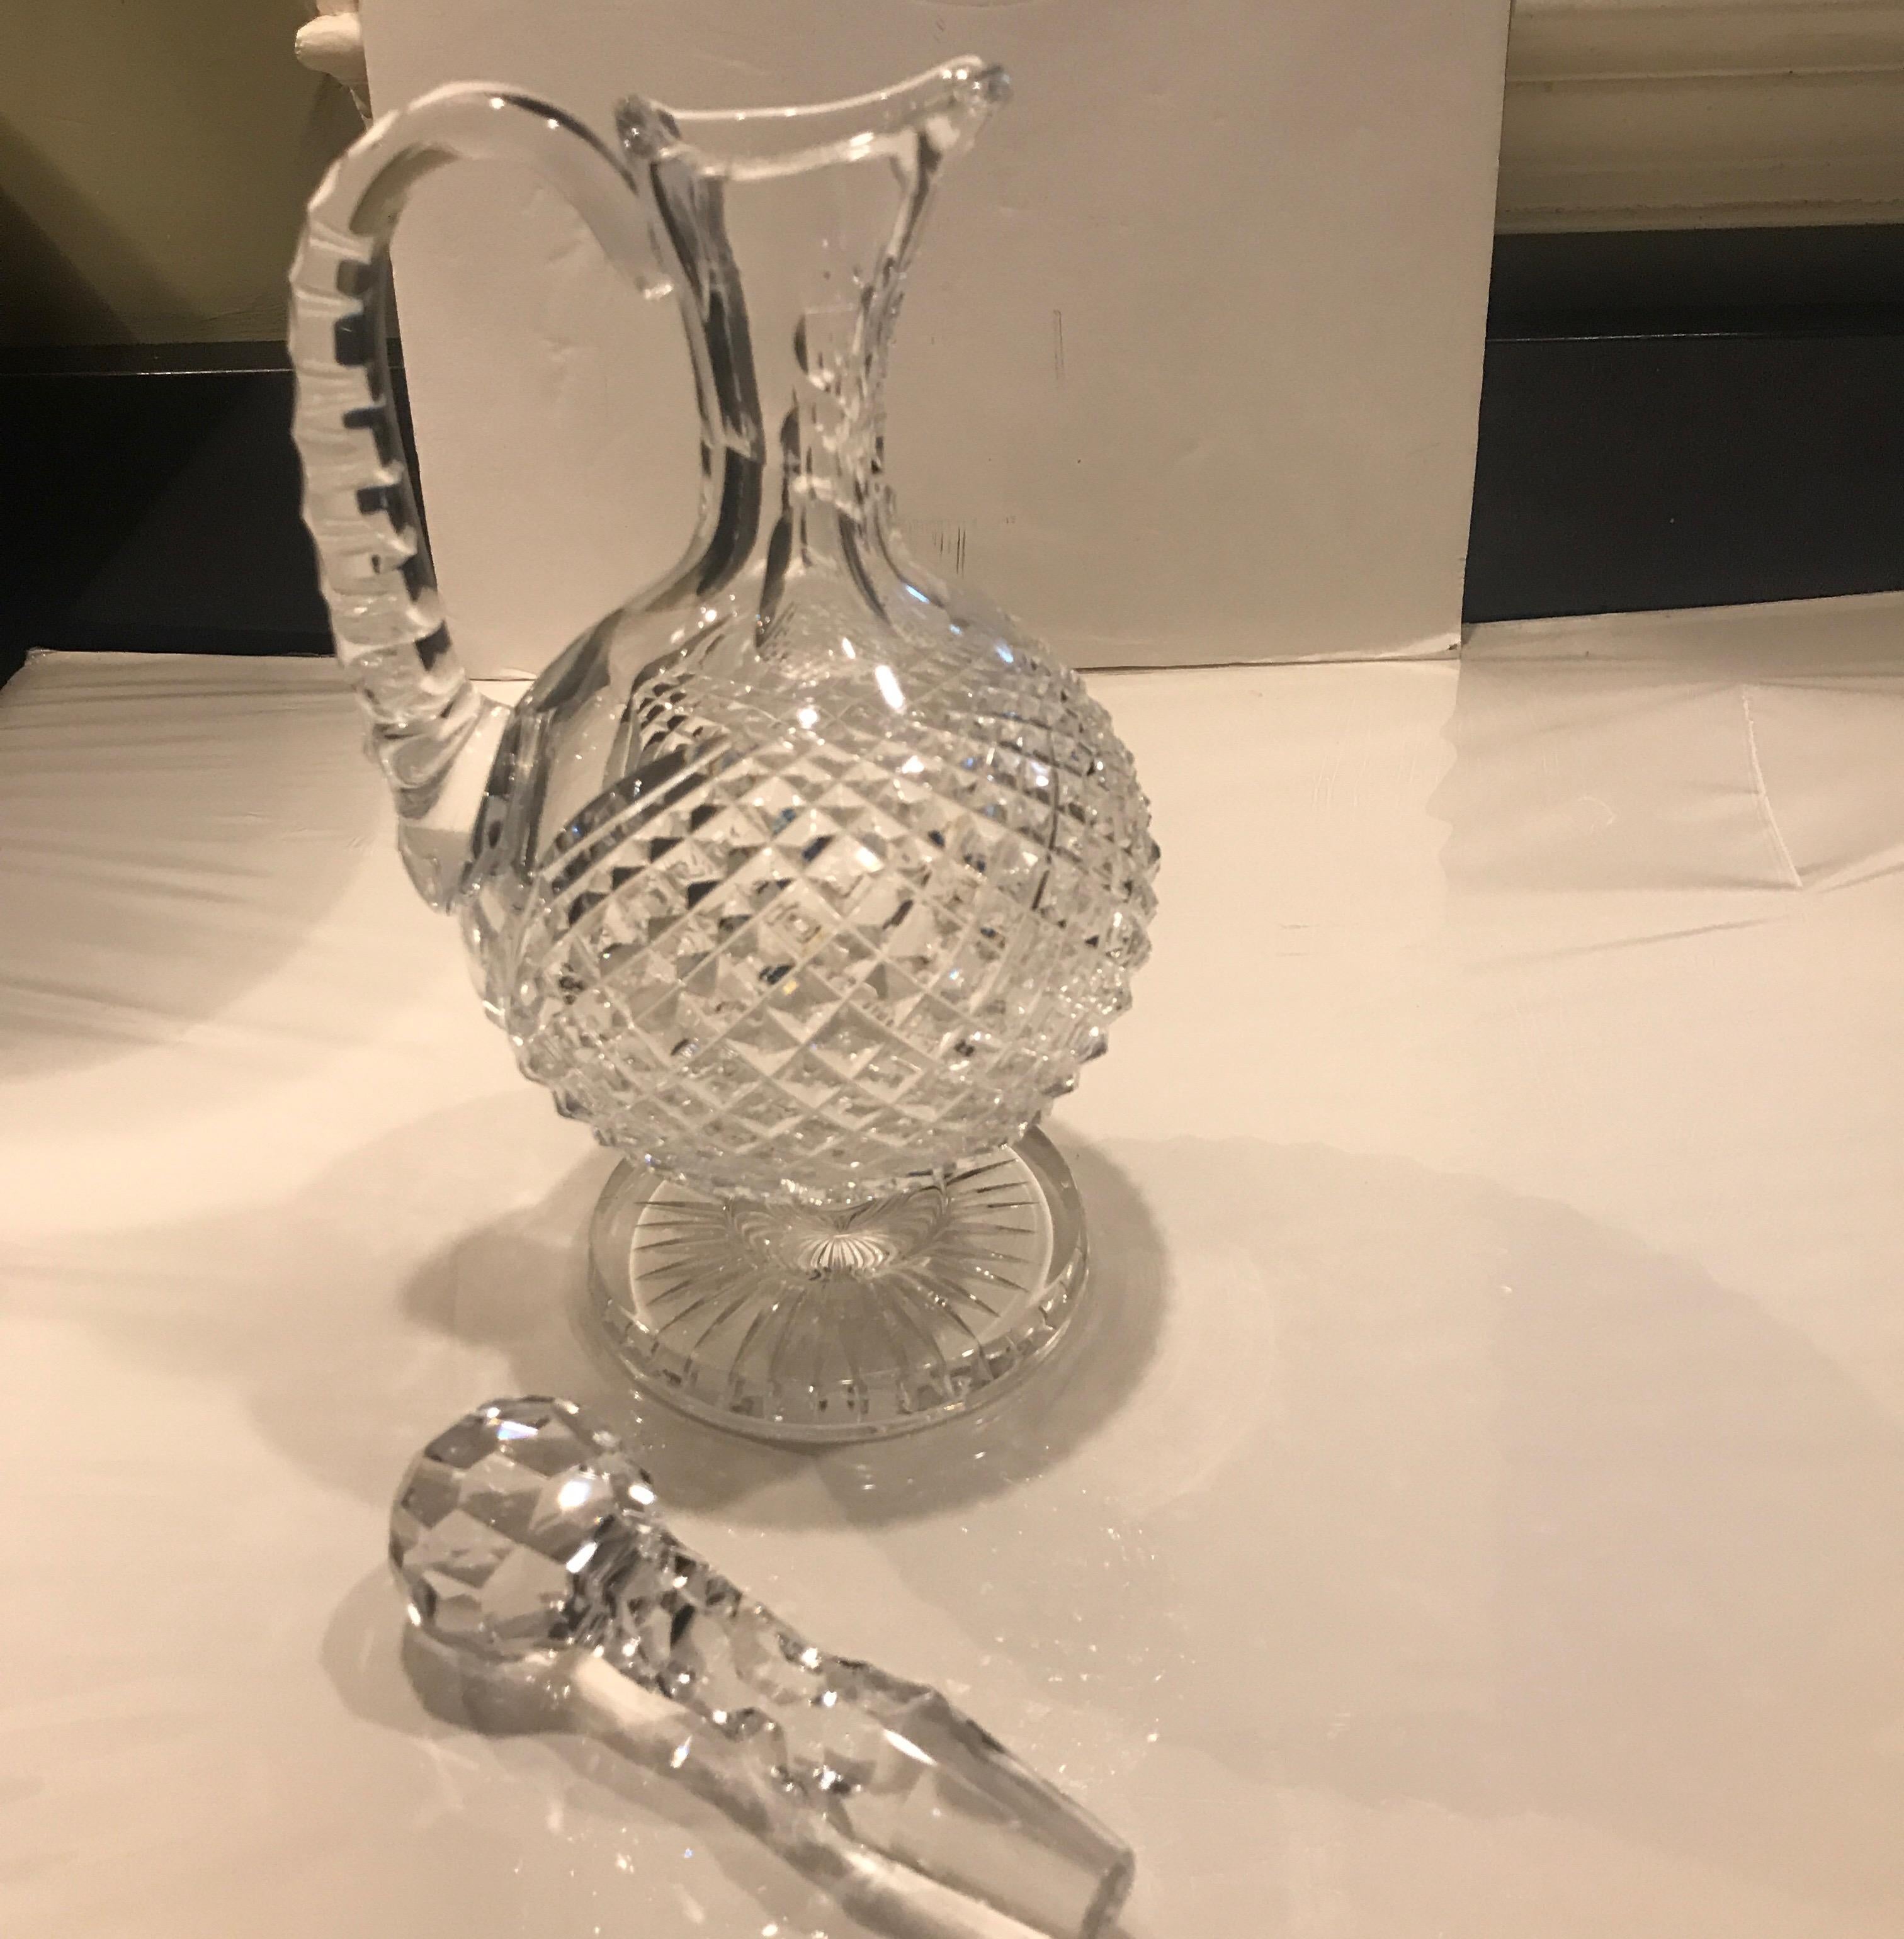 waterford claret decanter